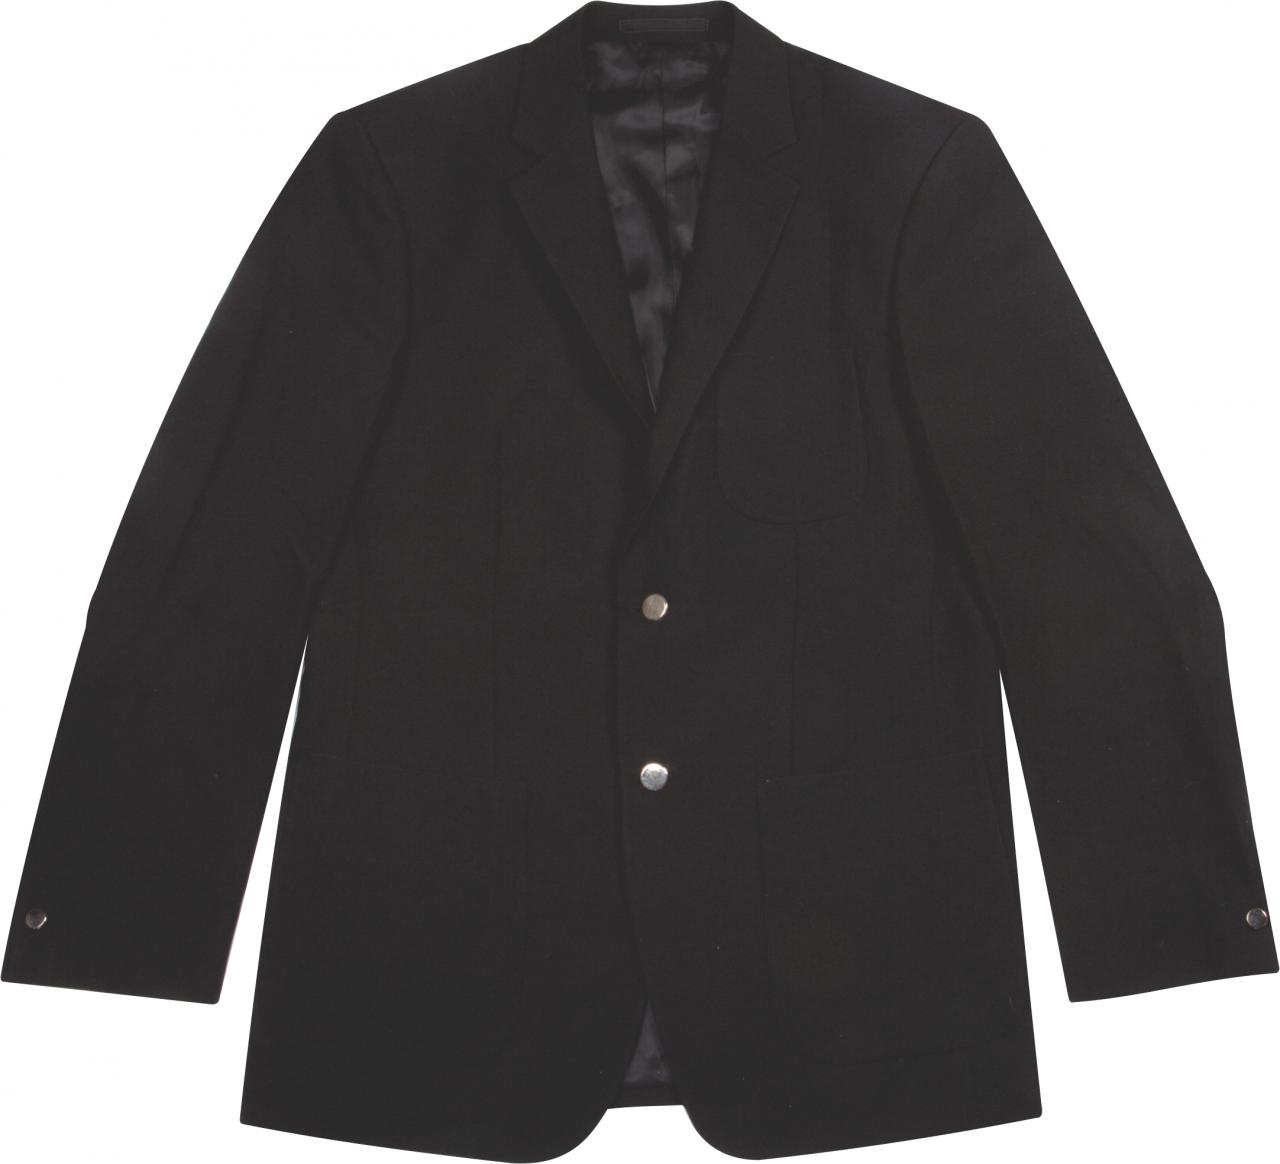 Security Blazer Knight Cole. Avail in Black or Navy. Sizes 34 -